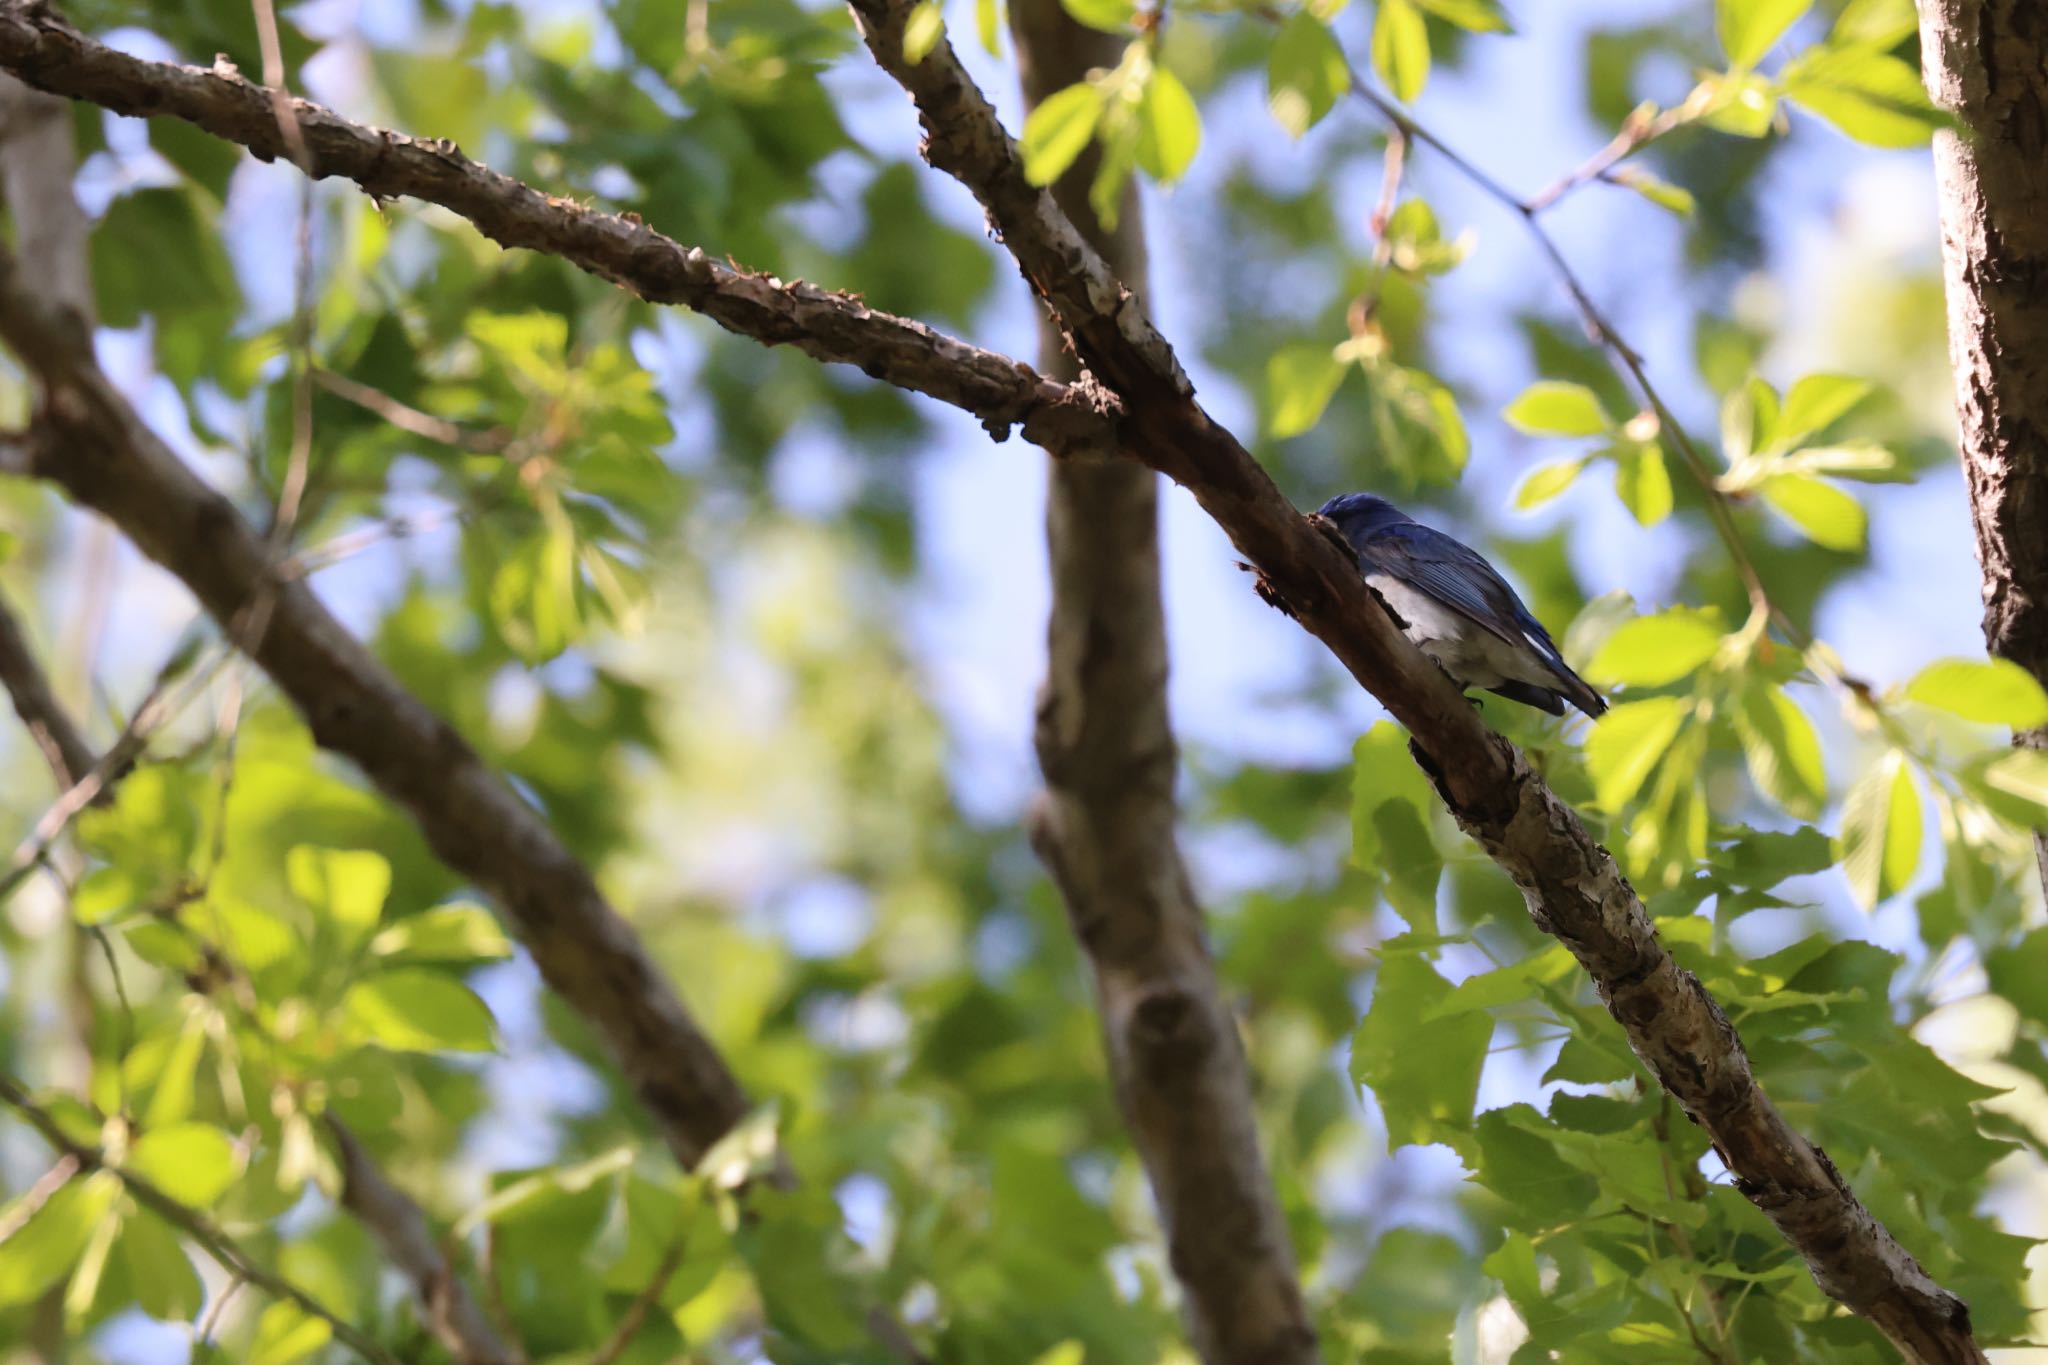 Photo of Blue-and-white Flycatcher at 北海道大学 by will 73